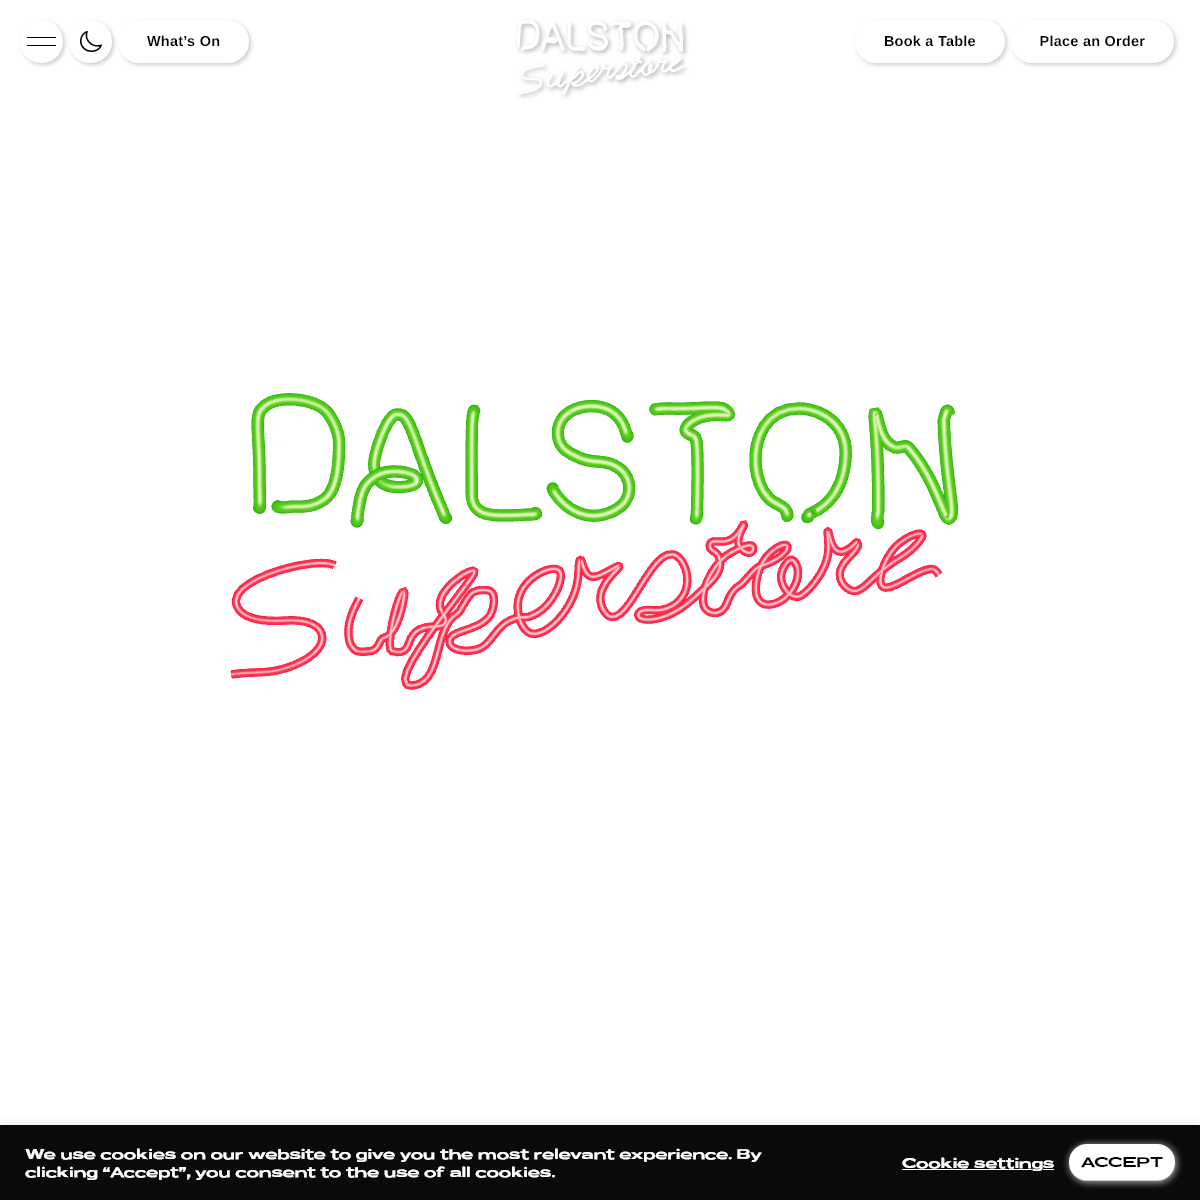 A complete backup of dalstonsuperstore.com